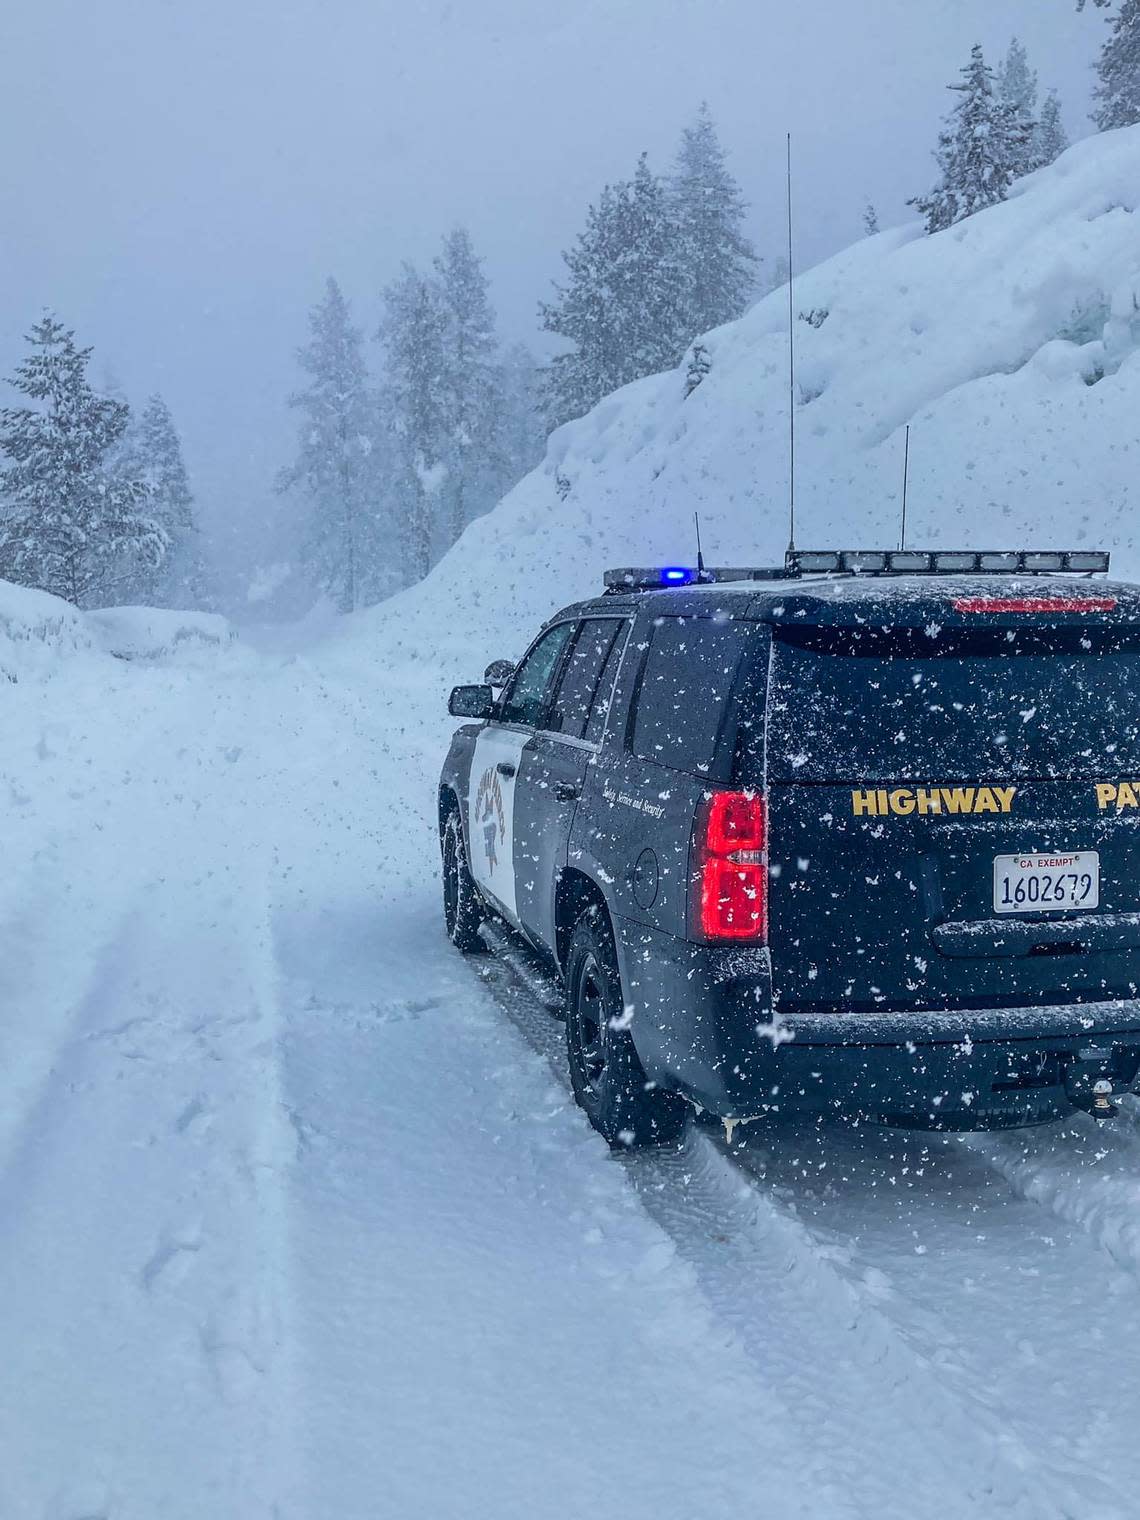 The California Highway Patrol posted photos of snow falling on Highway 168 just below China Peak Ski Resort in eastern Fresno County on Tuesday, March 14, 2023.